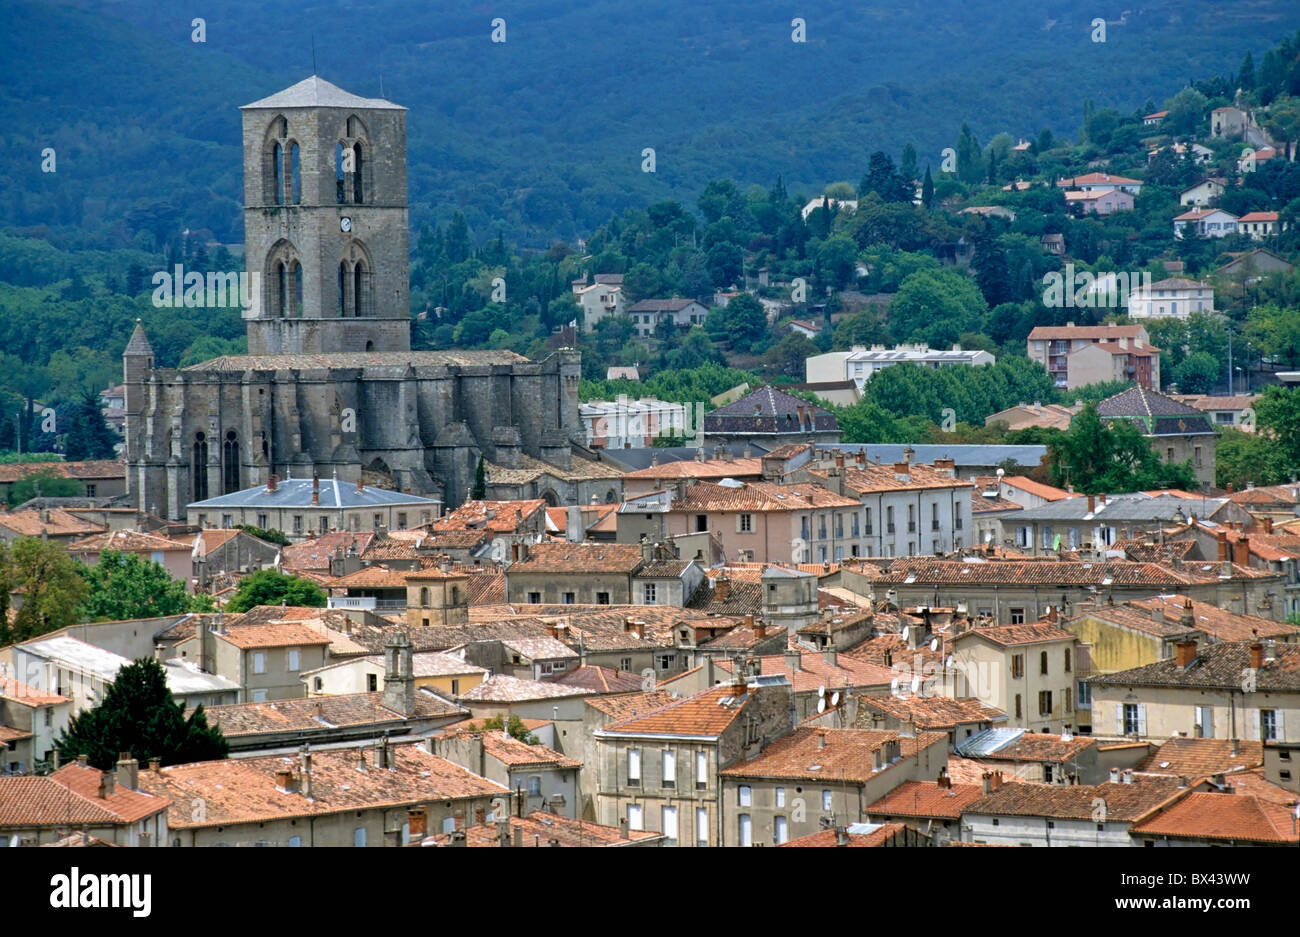 Cathedral towering above the red roofs of Lodeve, Herault, France Stock Photo